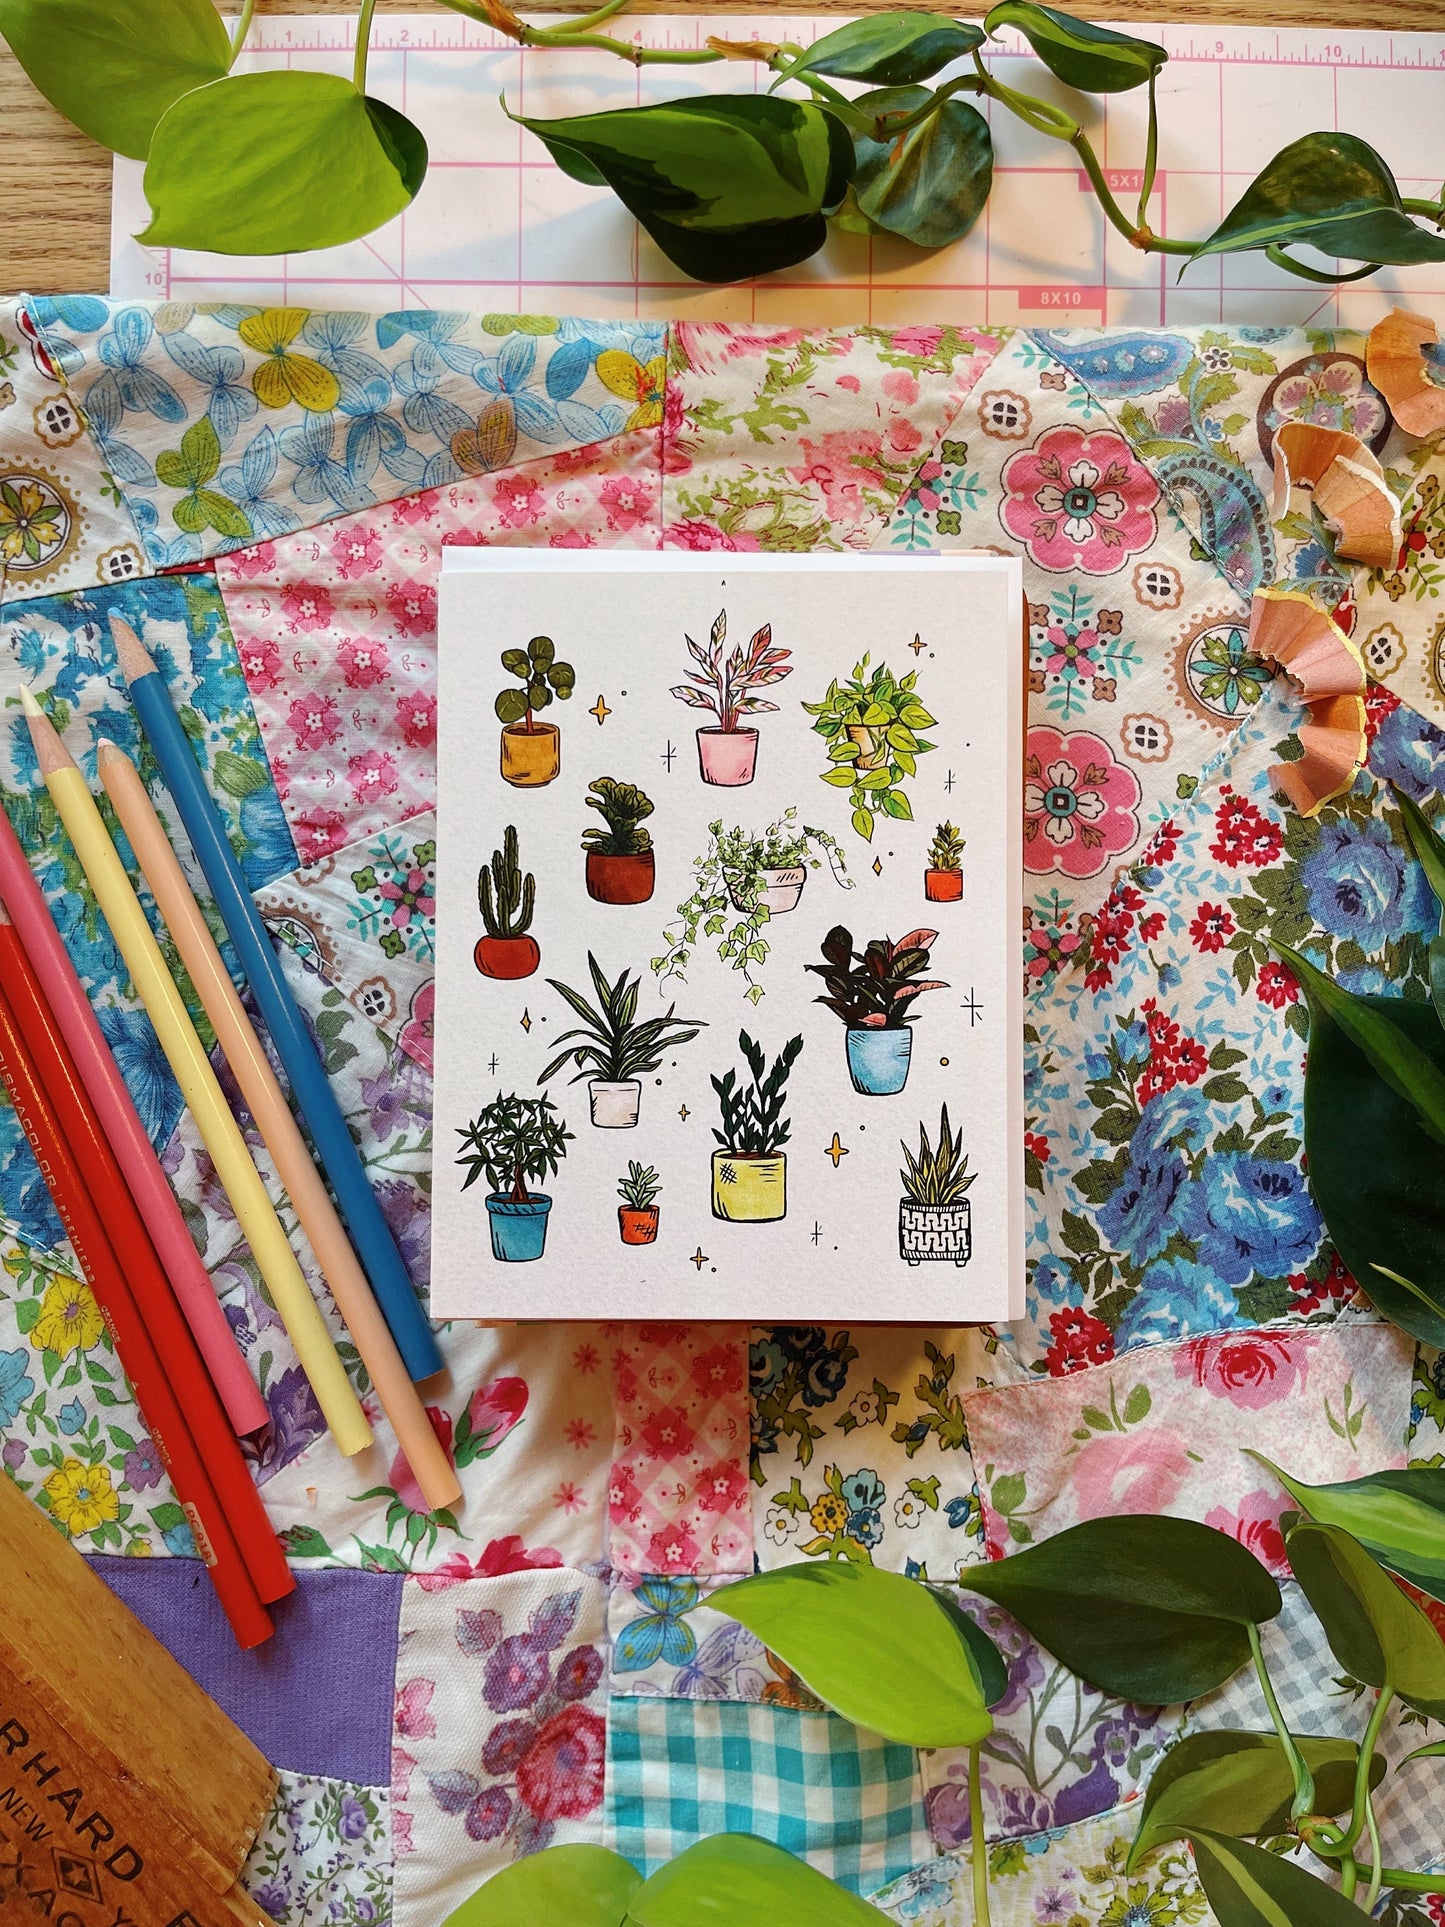 House Plants | Greeting Card